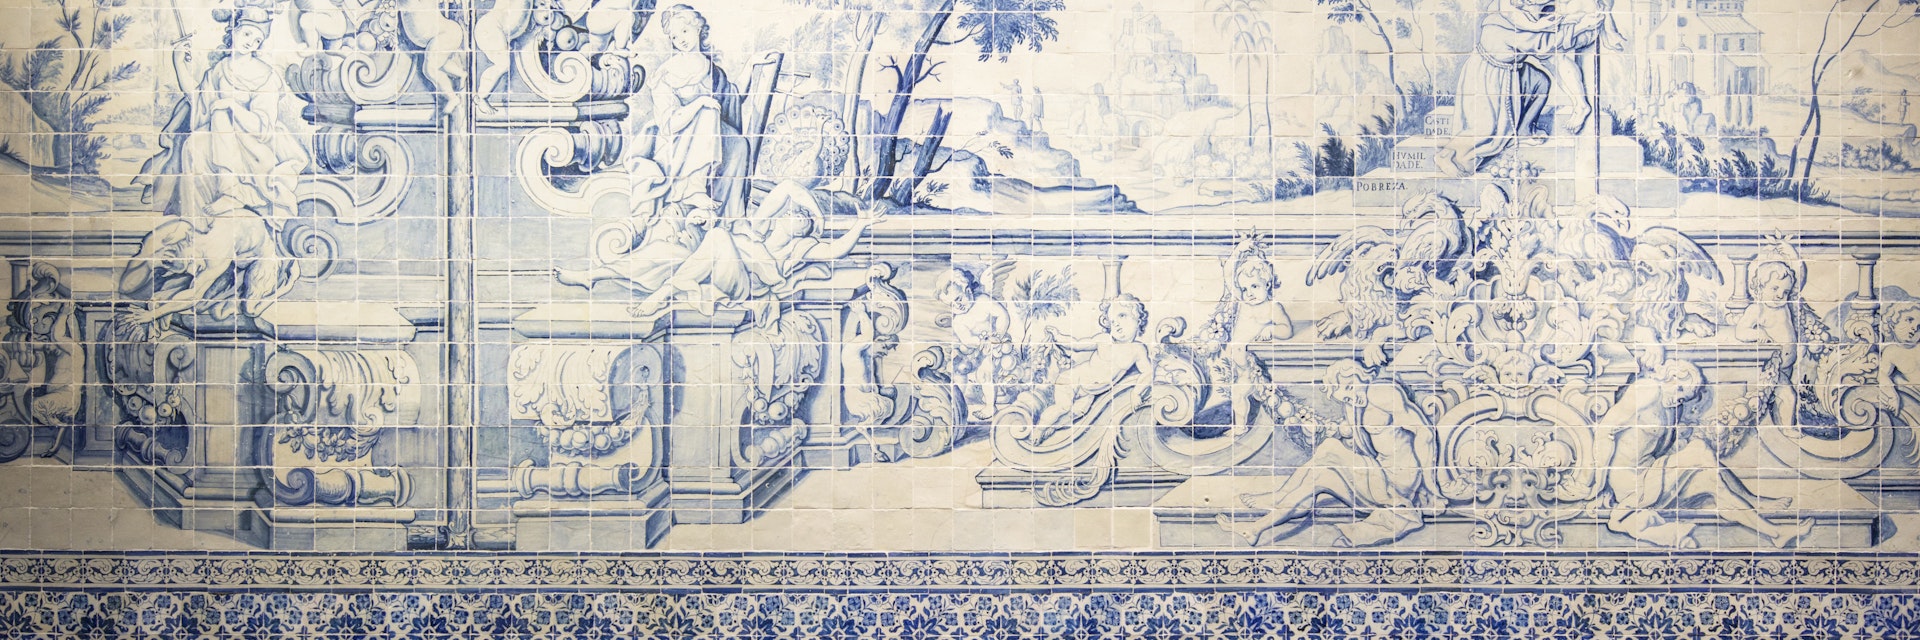 Tile detail in the Museo Nacional do Azulejo, Azulejos Museum.